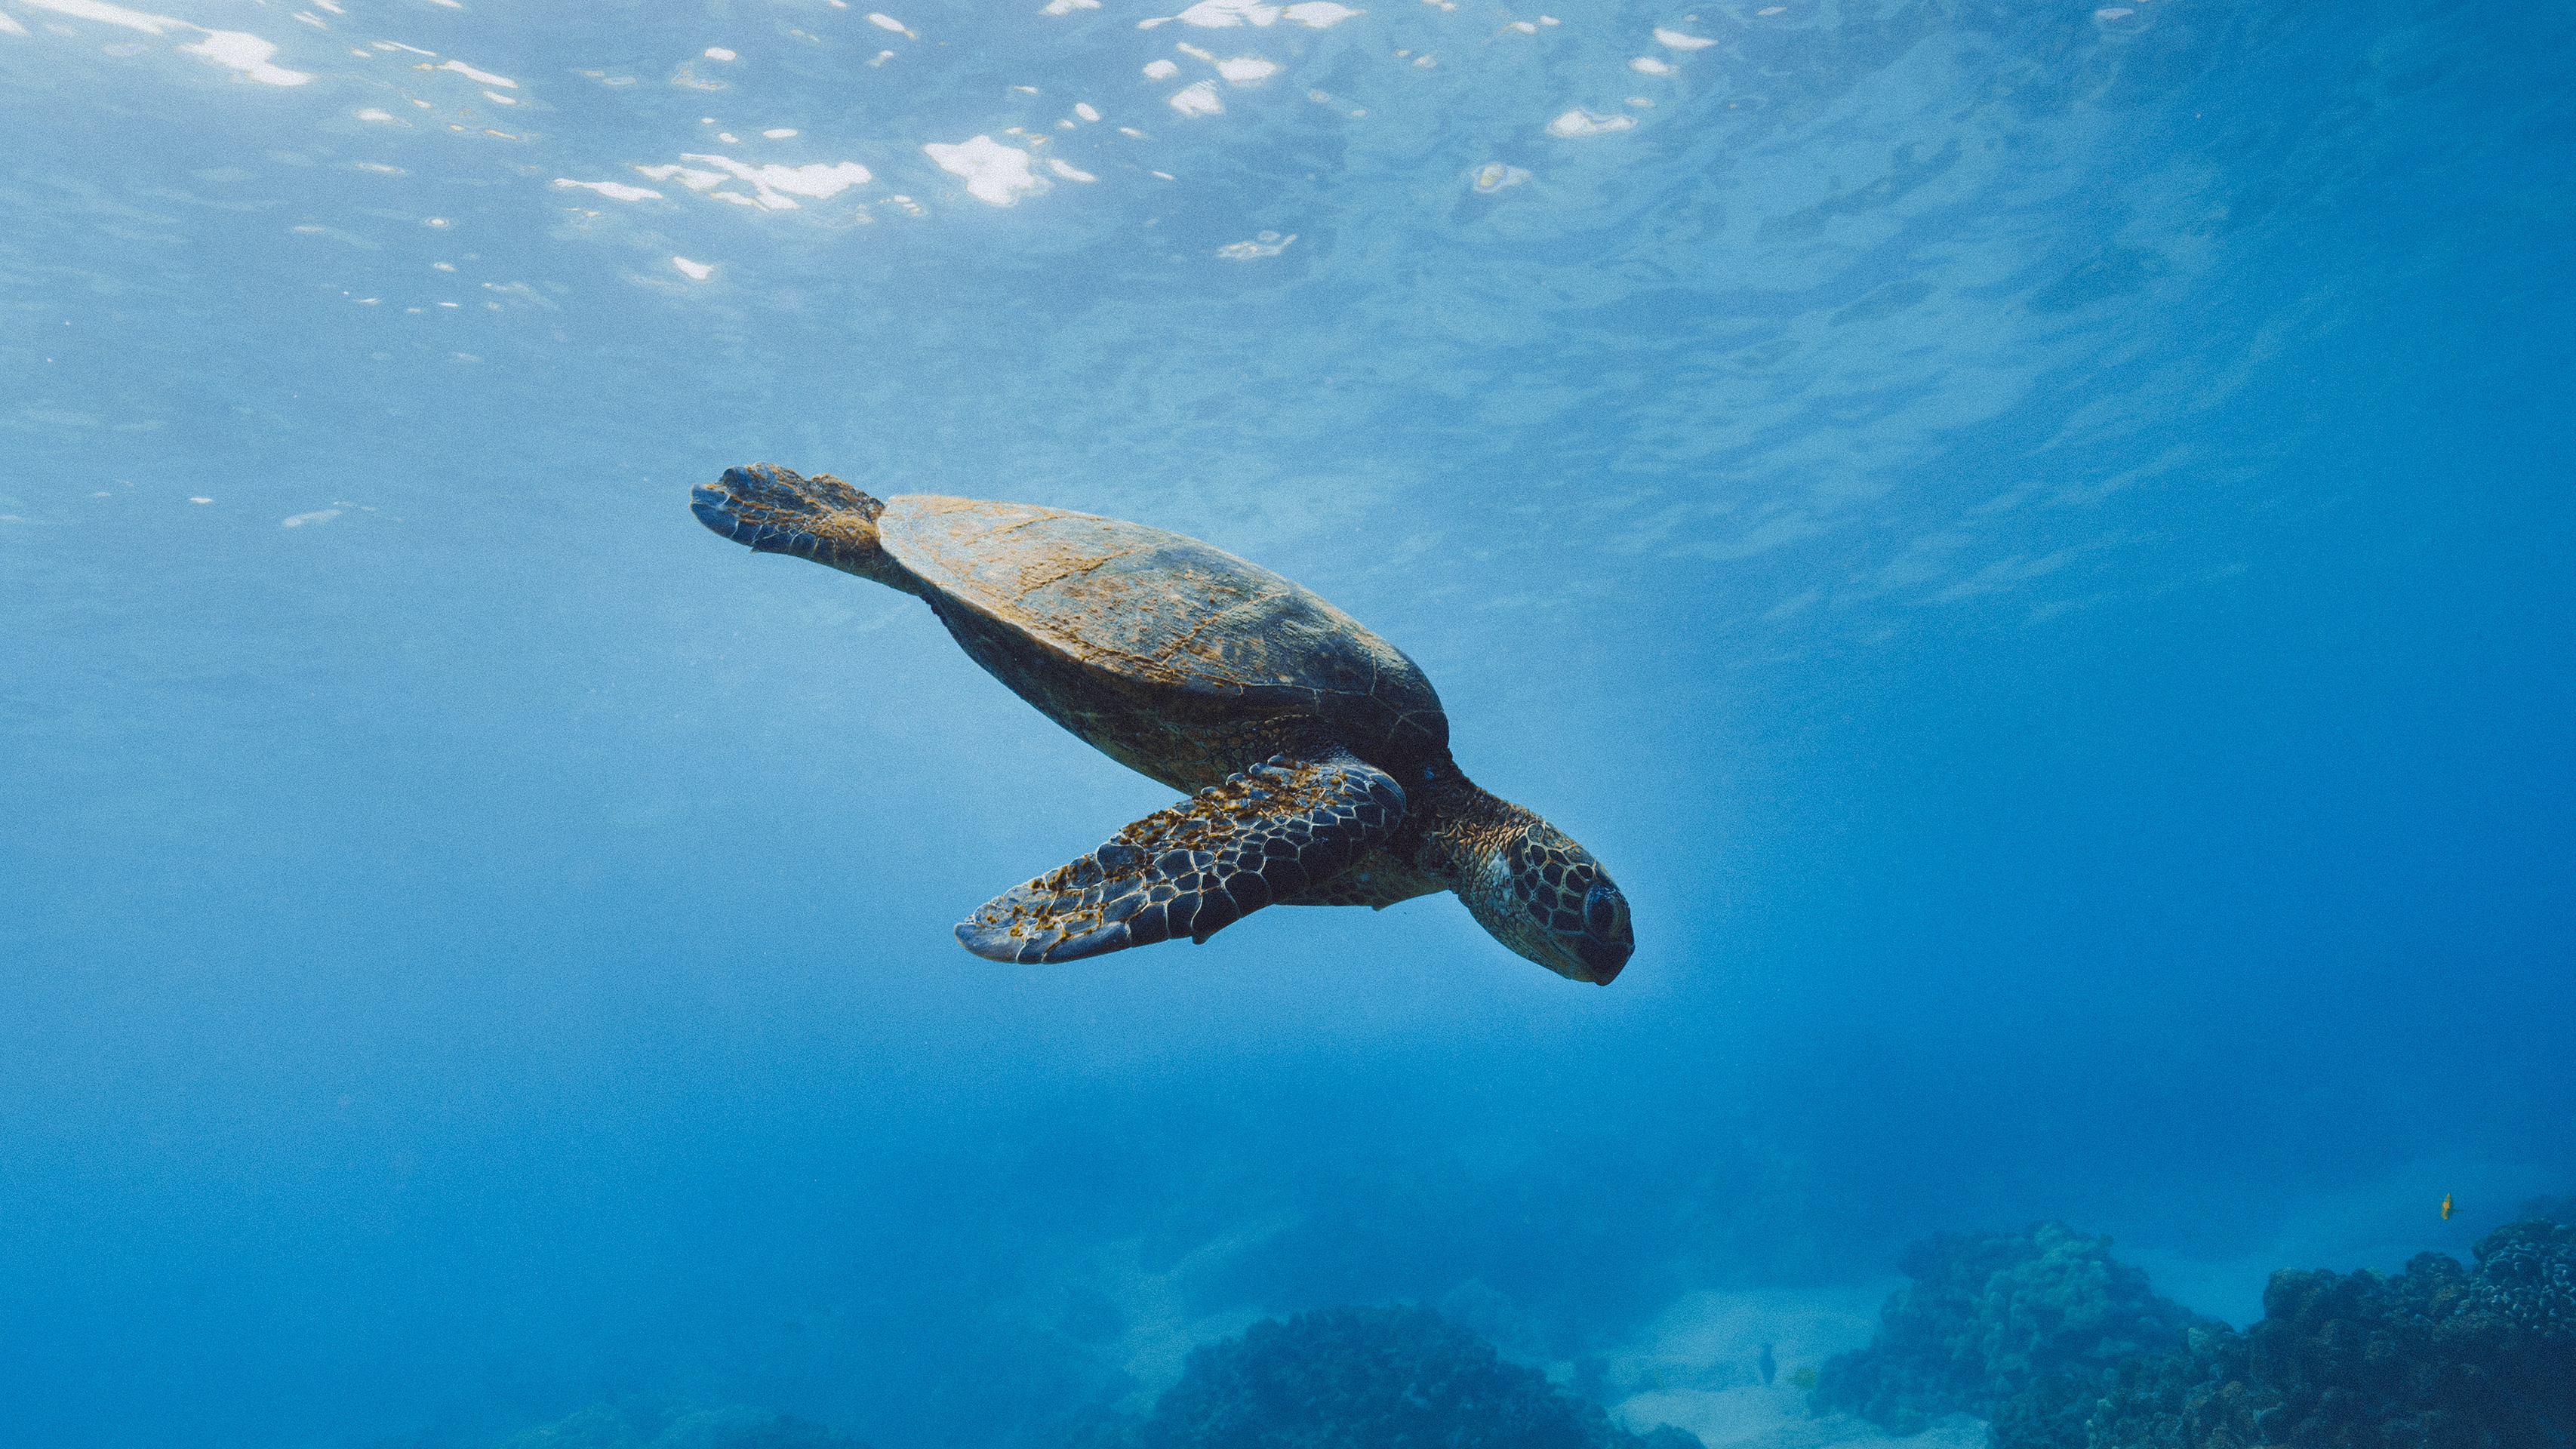 A Honu diving into the water